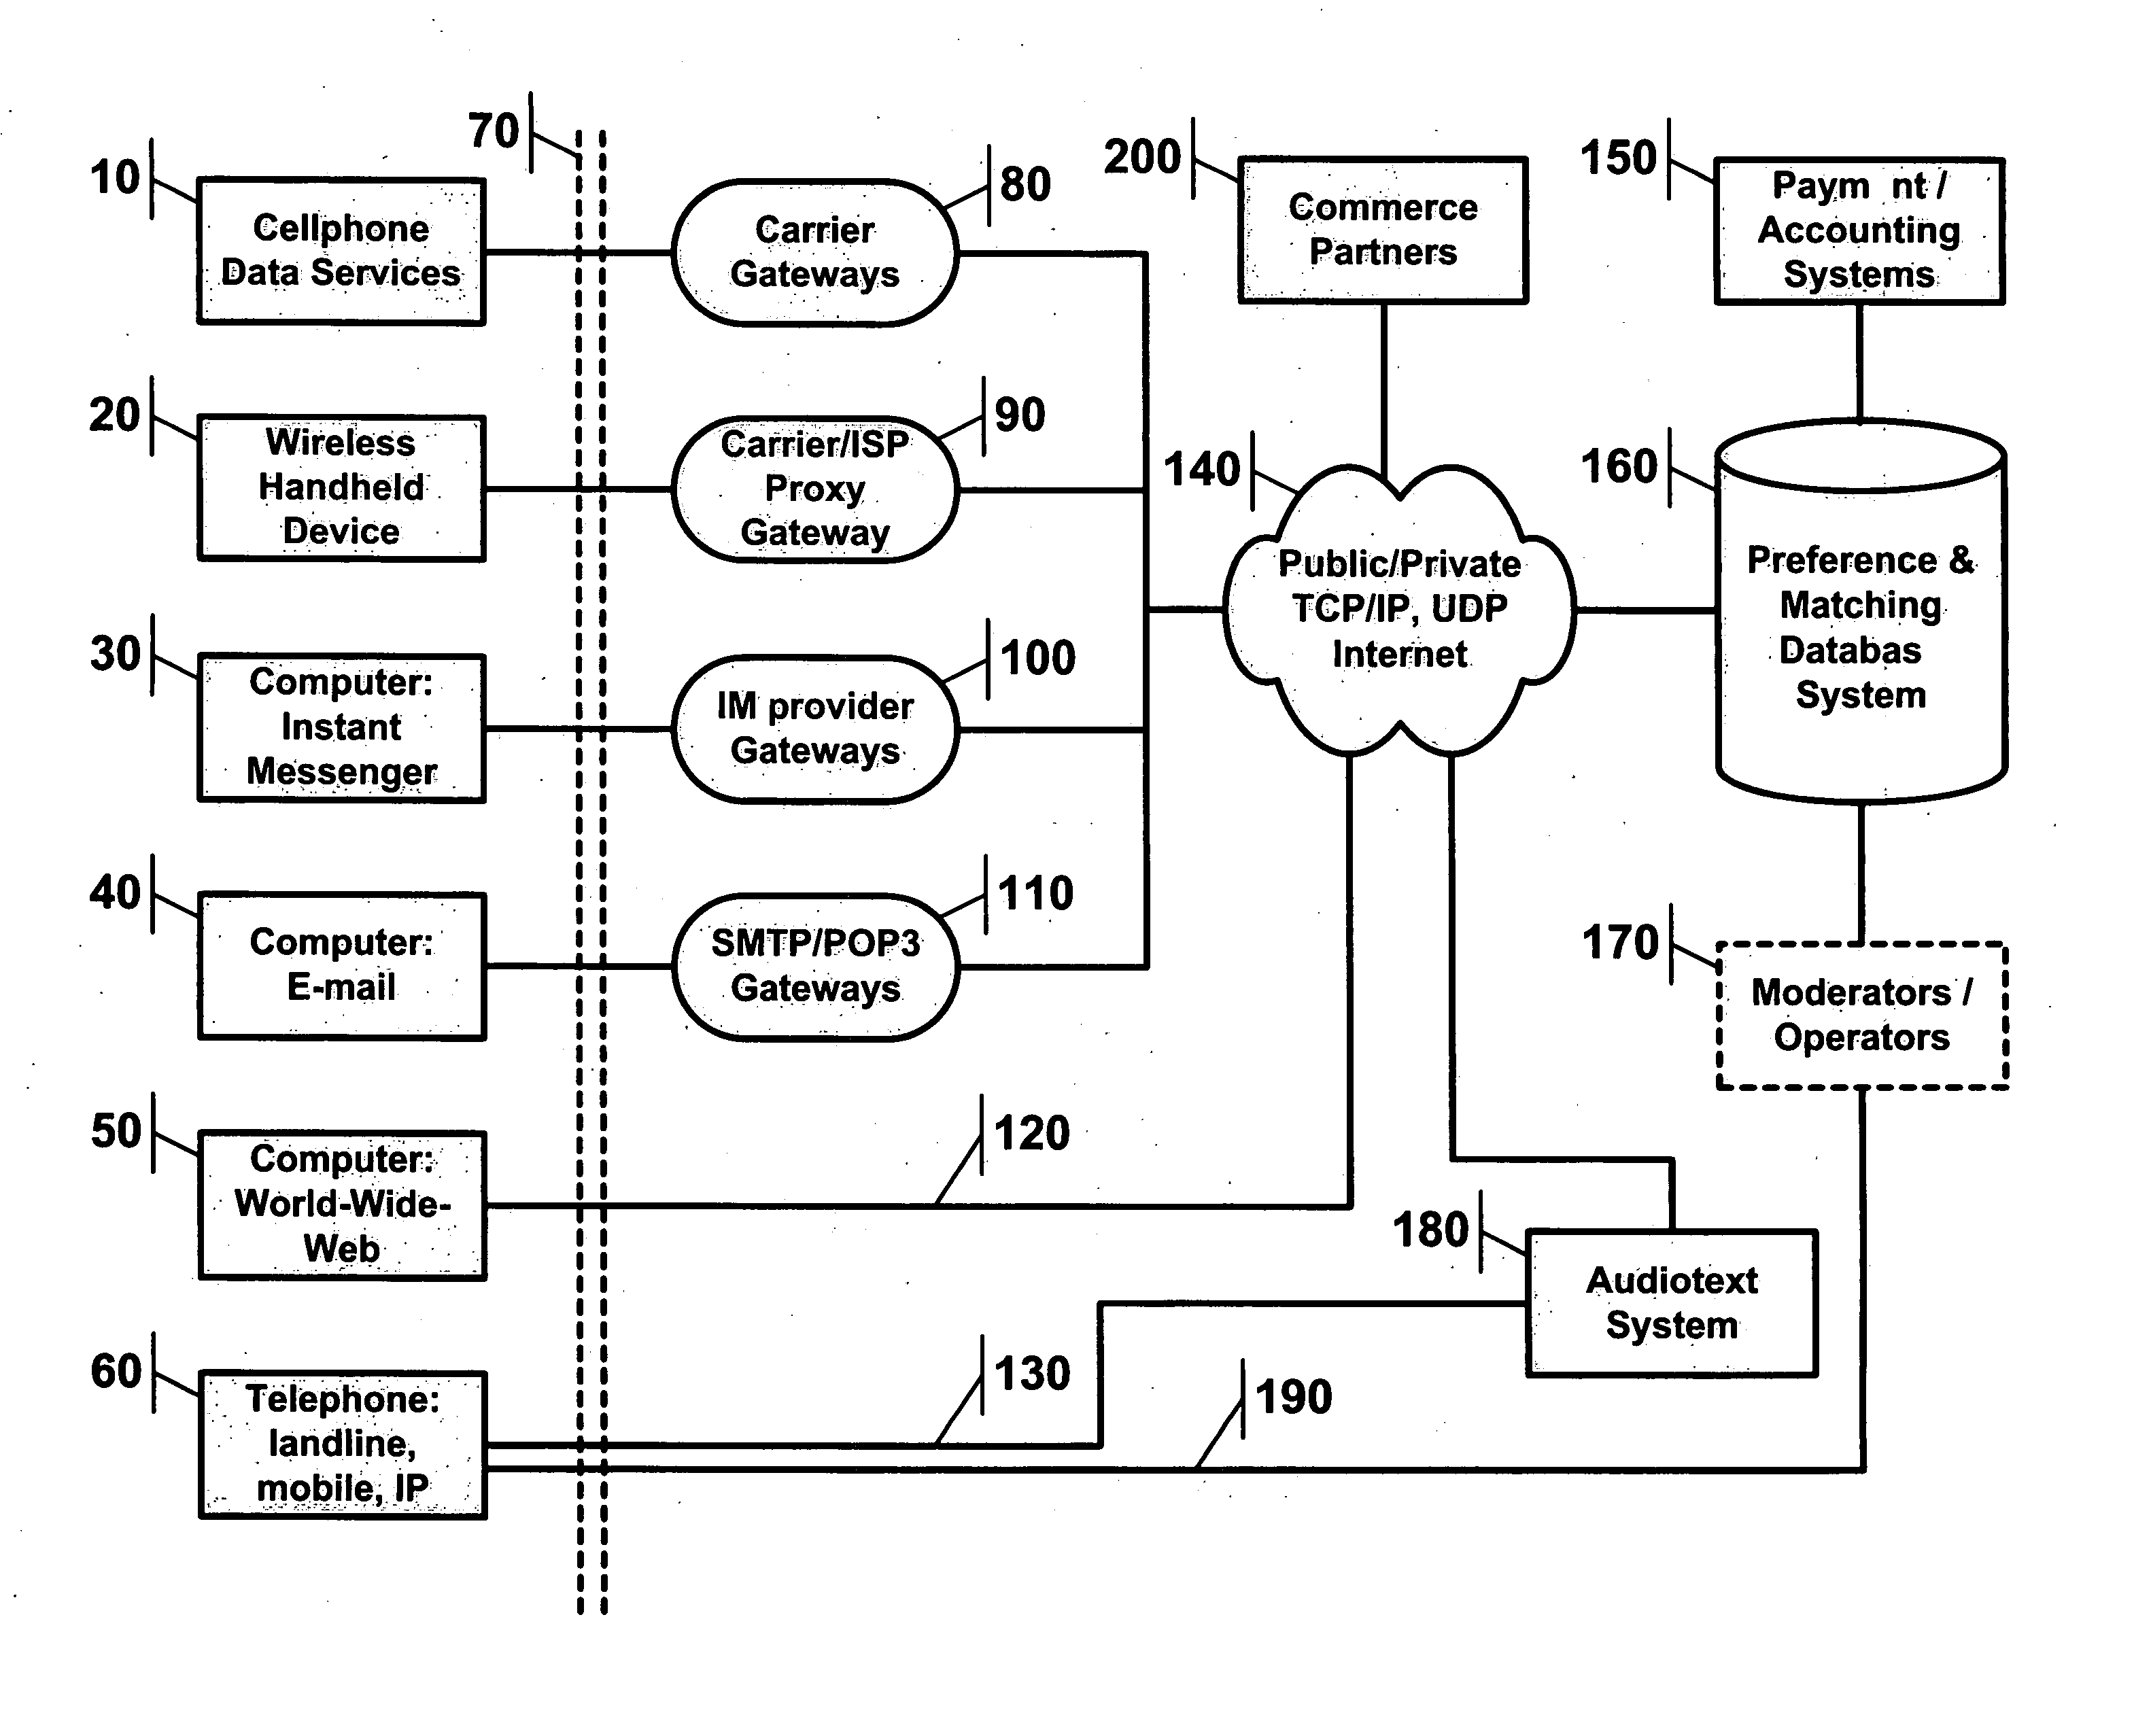 System and method for interactive communication between matched users